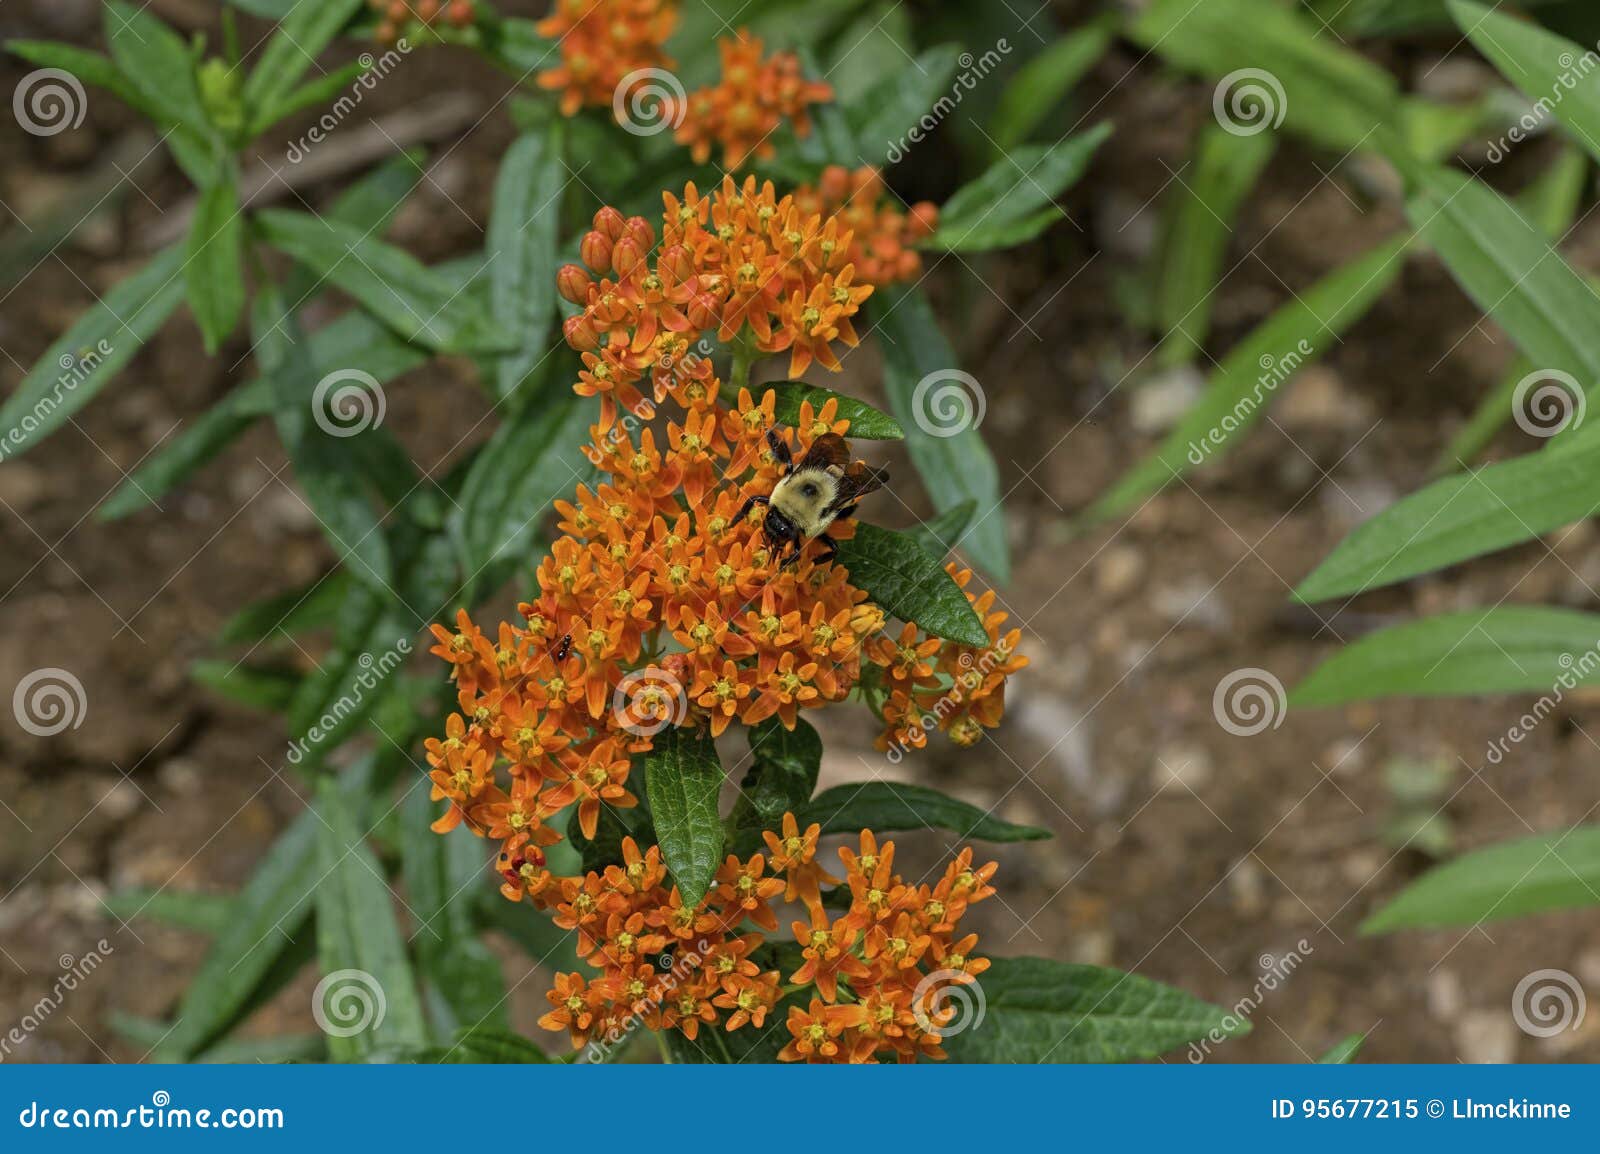 bumble bee on butterfly weed